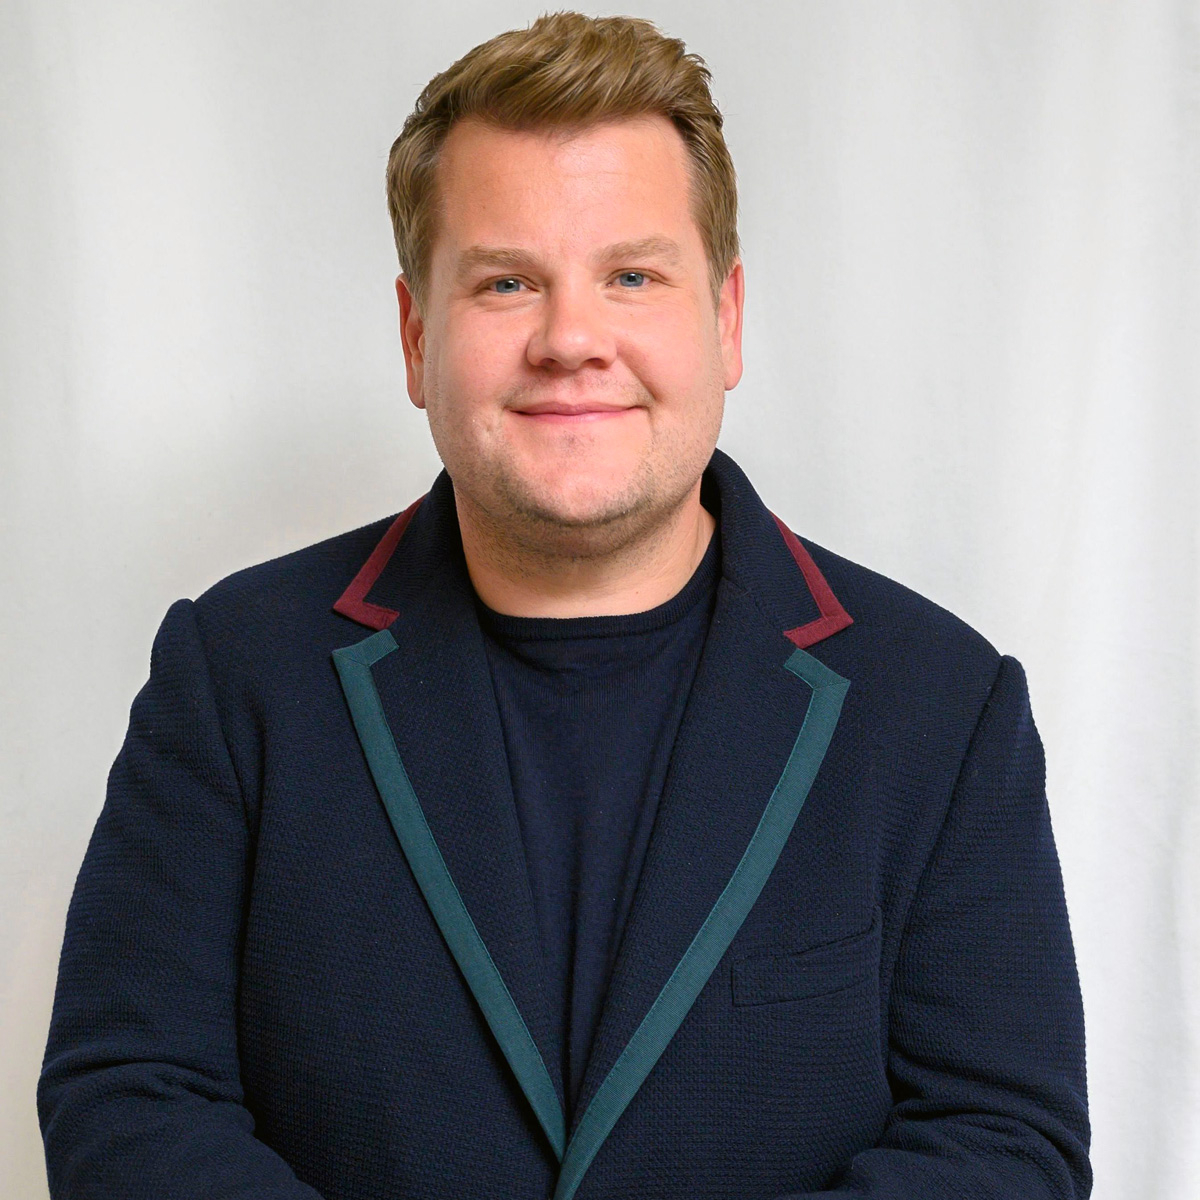 James Corden on his health journey and the “stigma” that hurt him